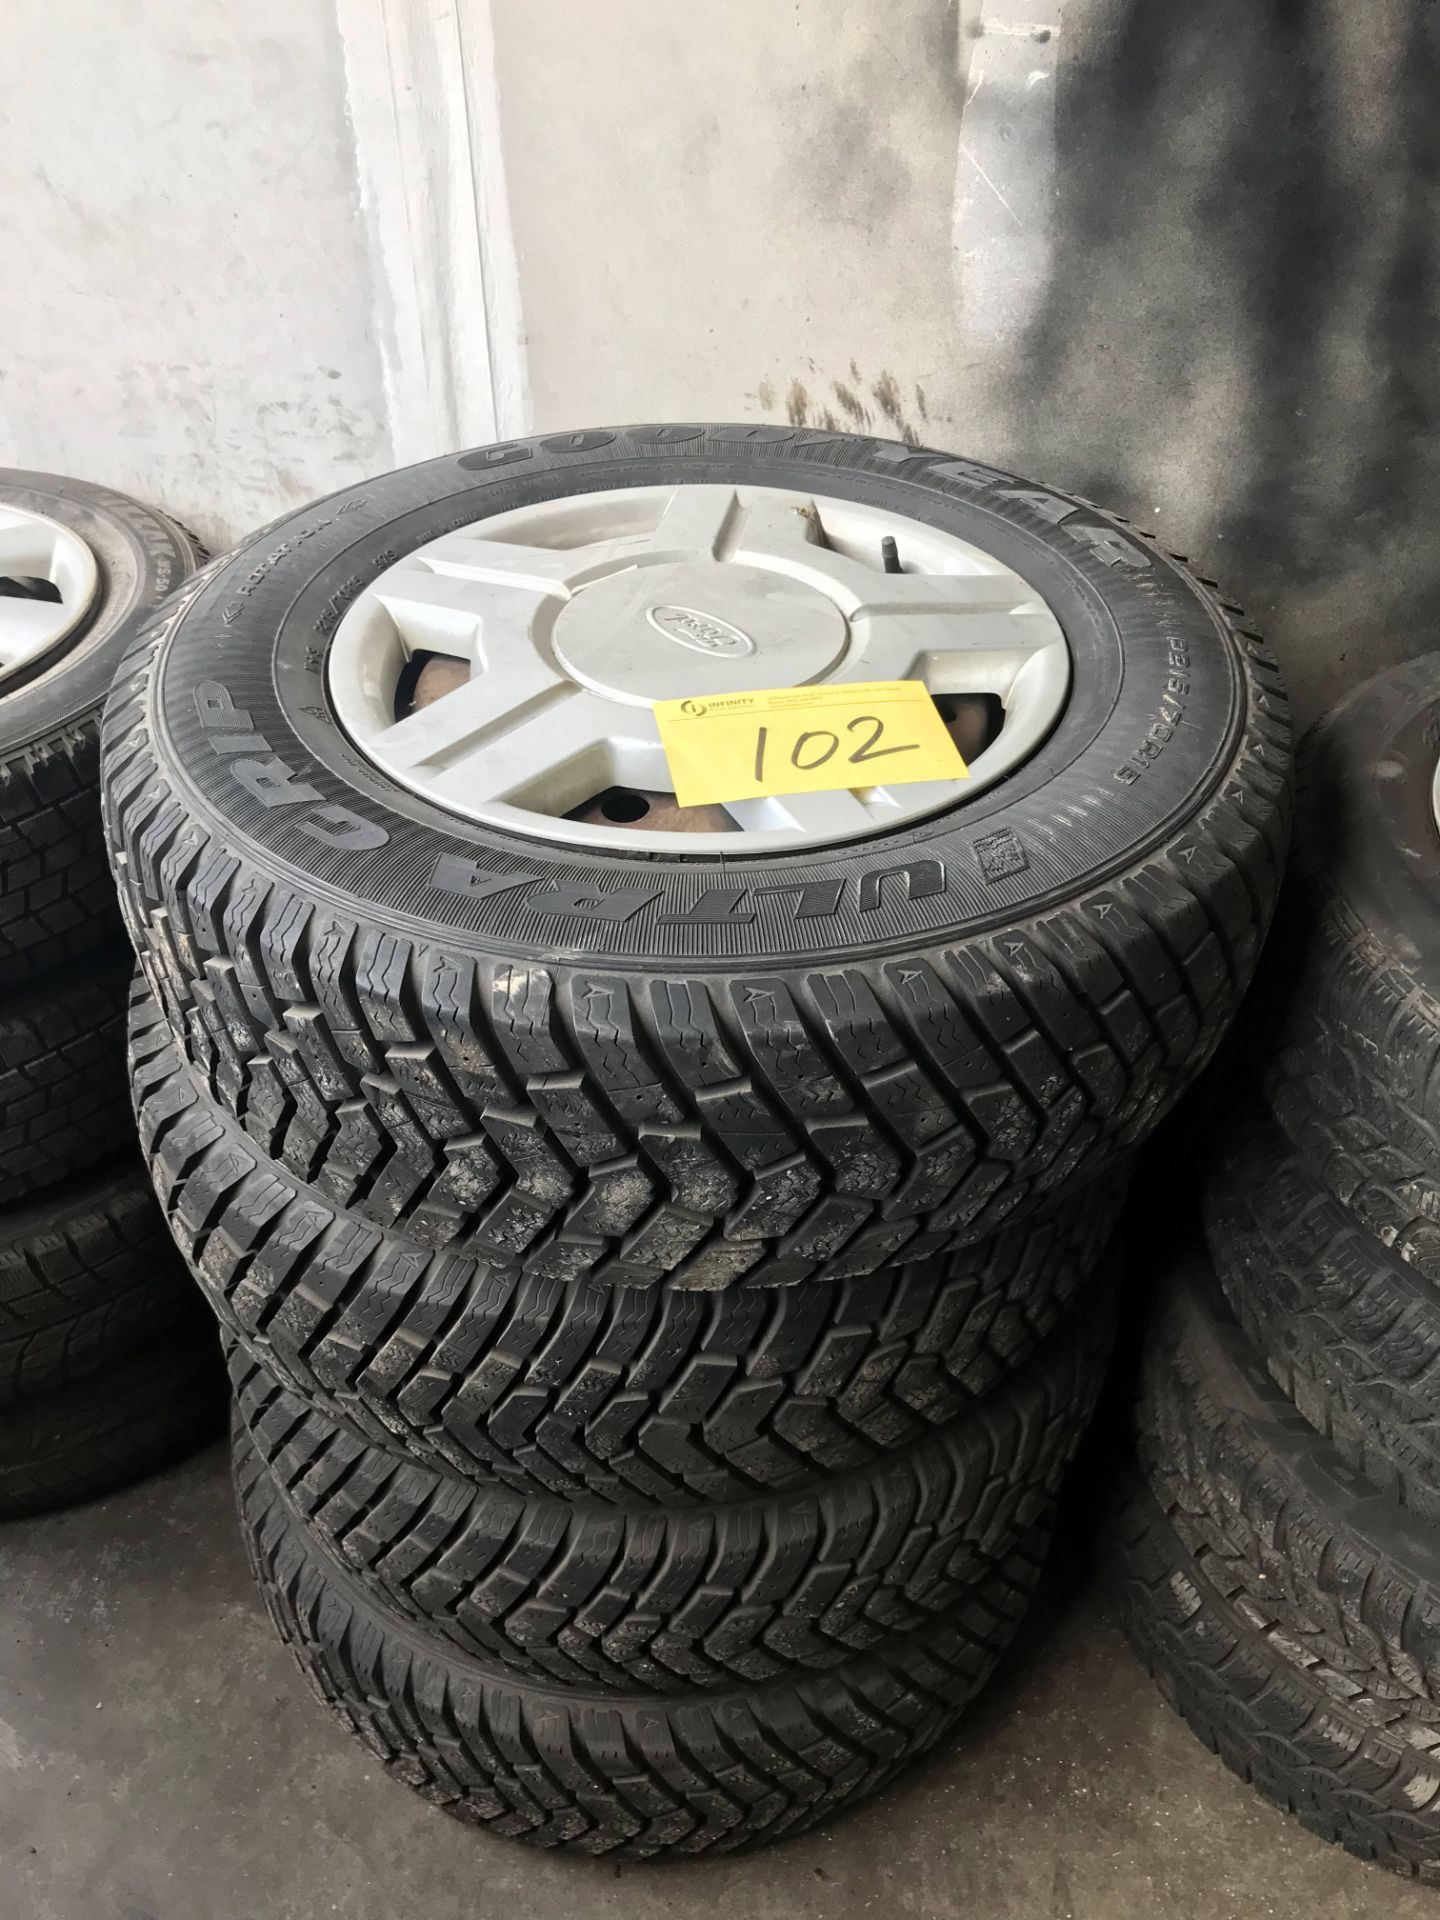 LOT (4) GOODYEAR ULTRA GRIP TIRES, P215/70R15 WINTER - Image 3 of 4